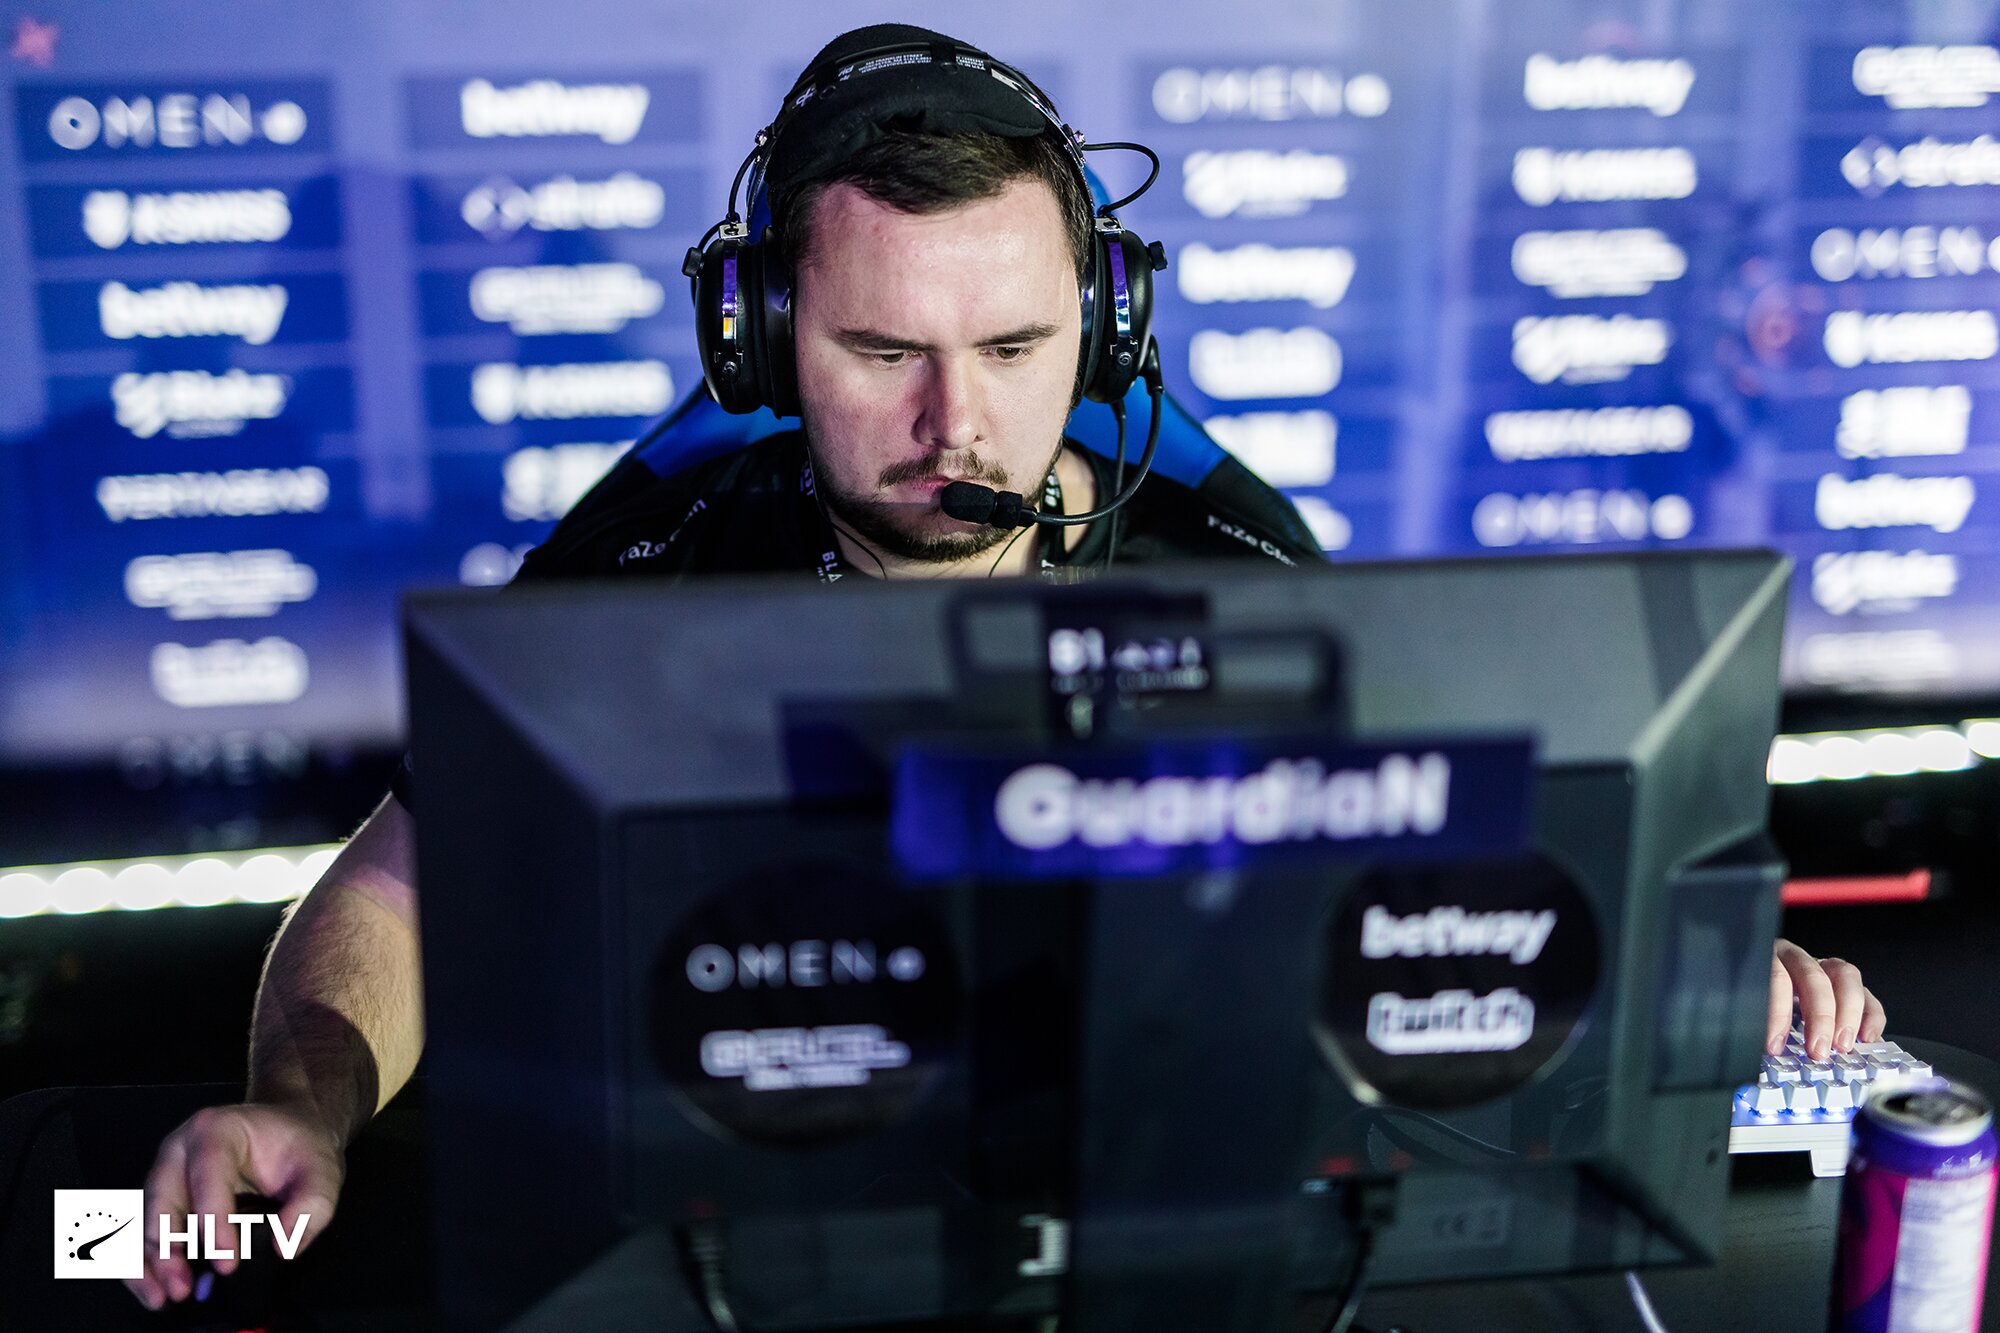 Ladislav “GuardiaN” Kovács will be reuniting with his former organization after his departure from FaZe Clan. (Photo via HLTV)